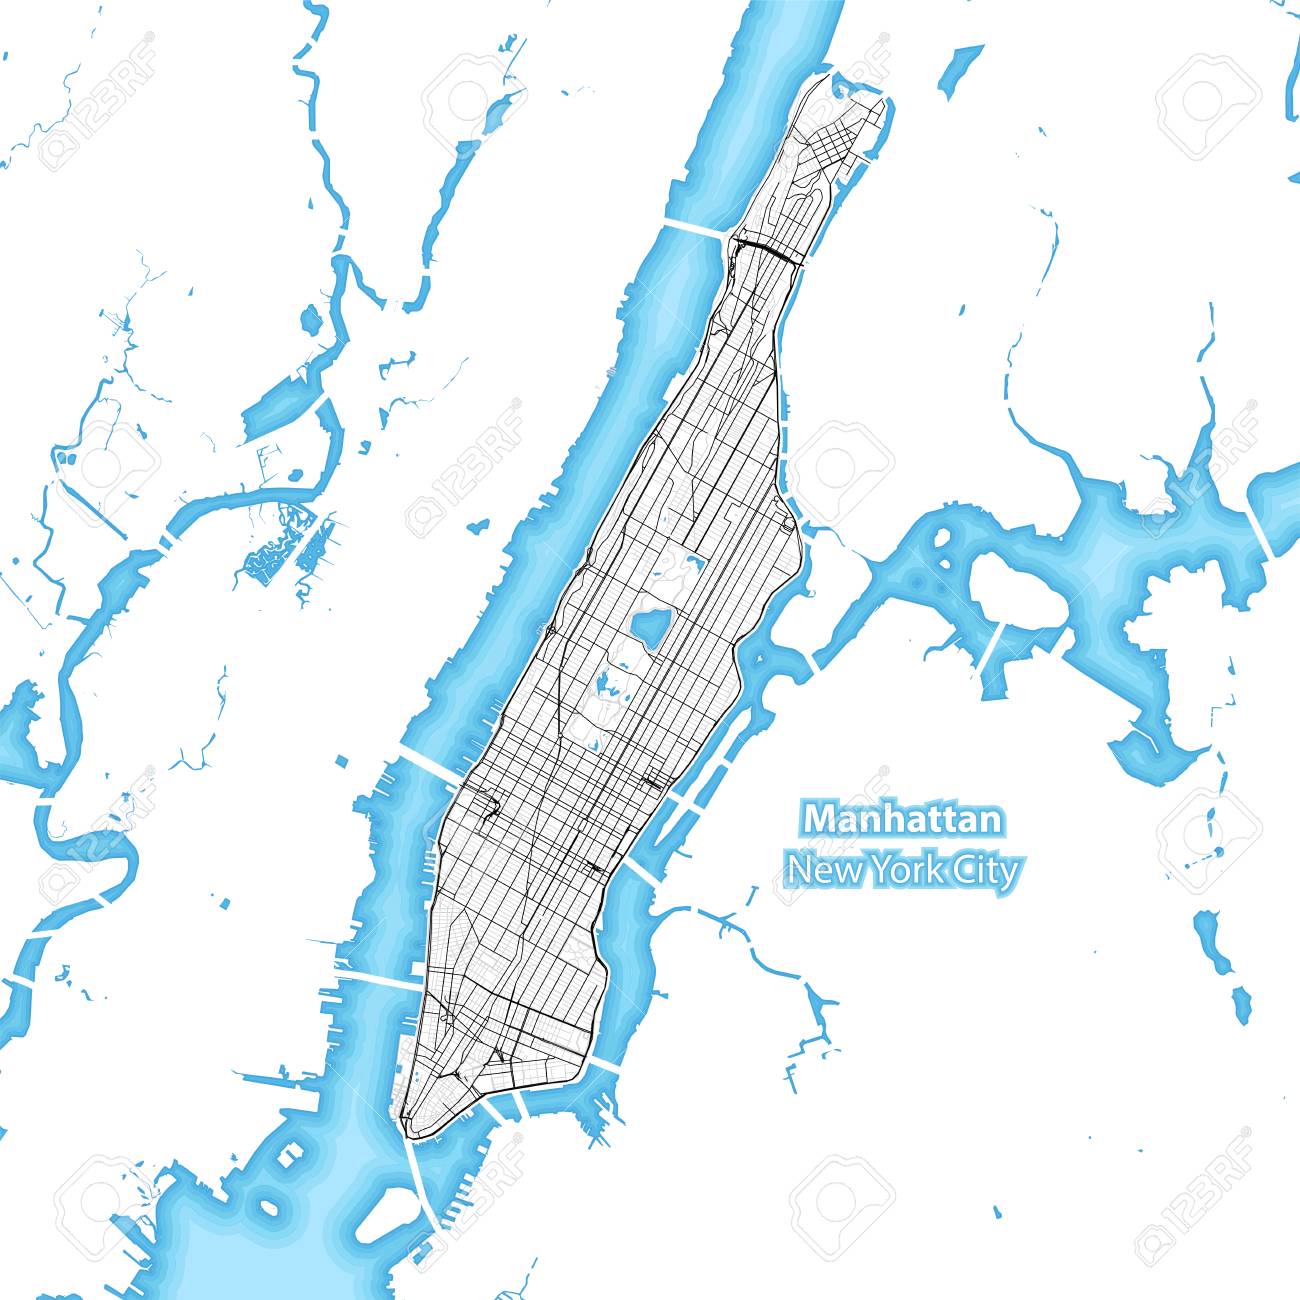 102465273-map-of-the-island-of-manhattan-new-york-city-indonesia-with-the-largest-highways-roads-and-surroundi.jpg